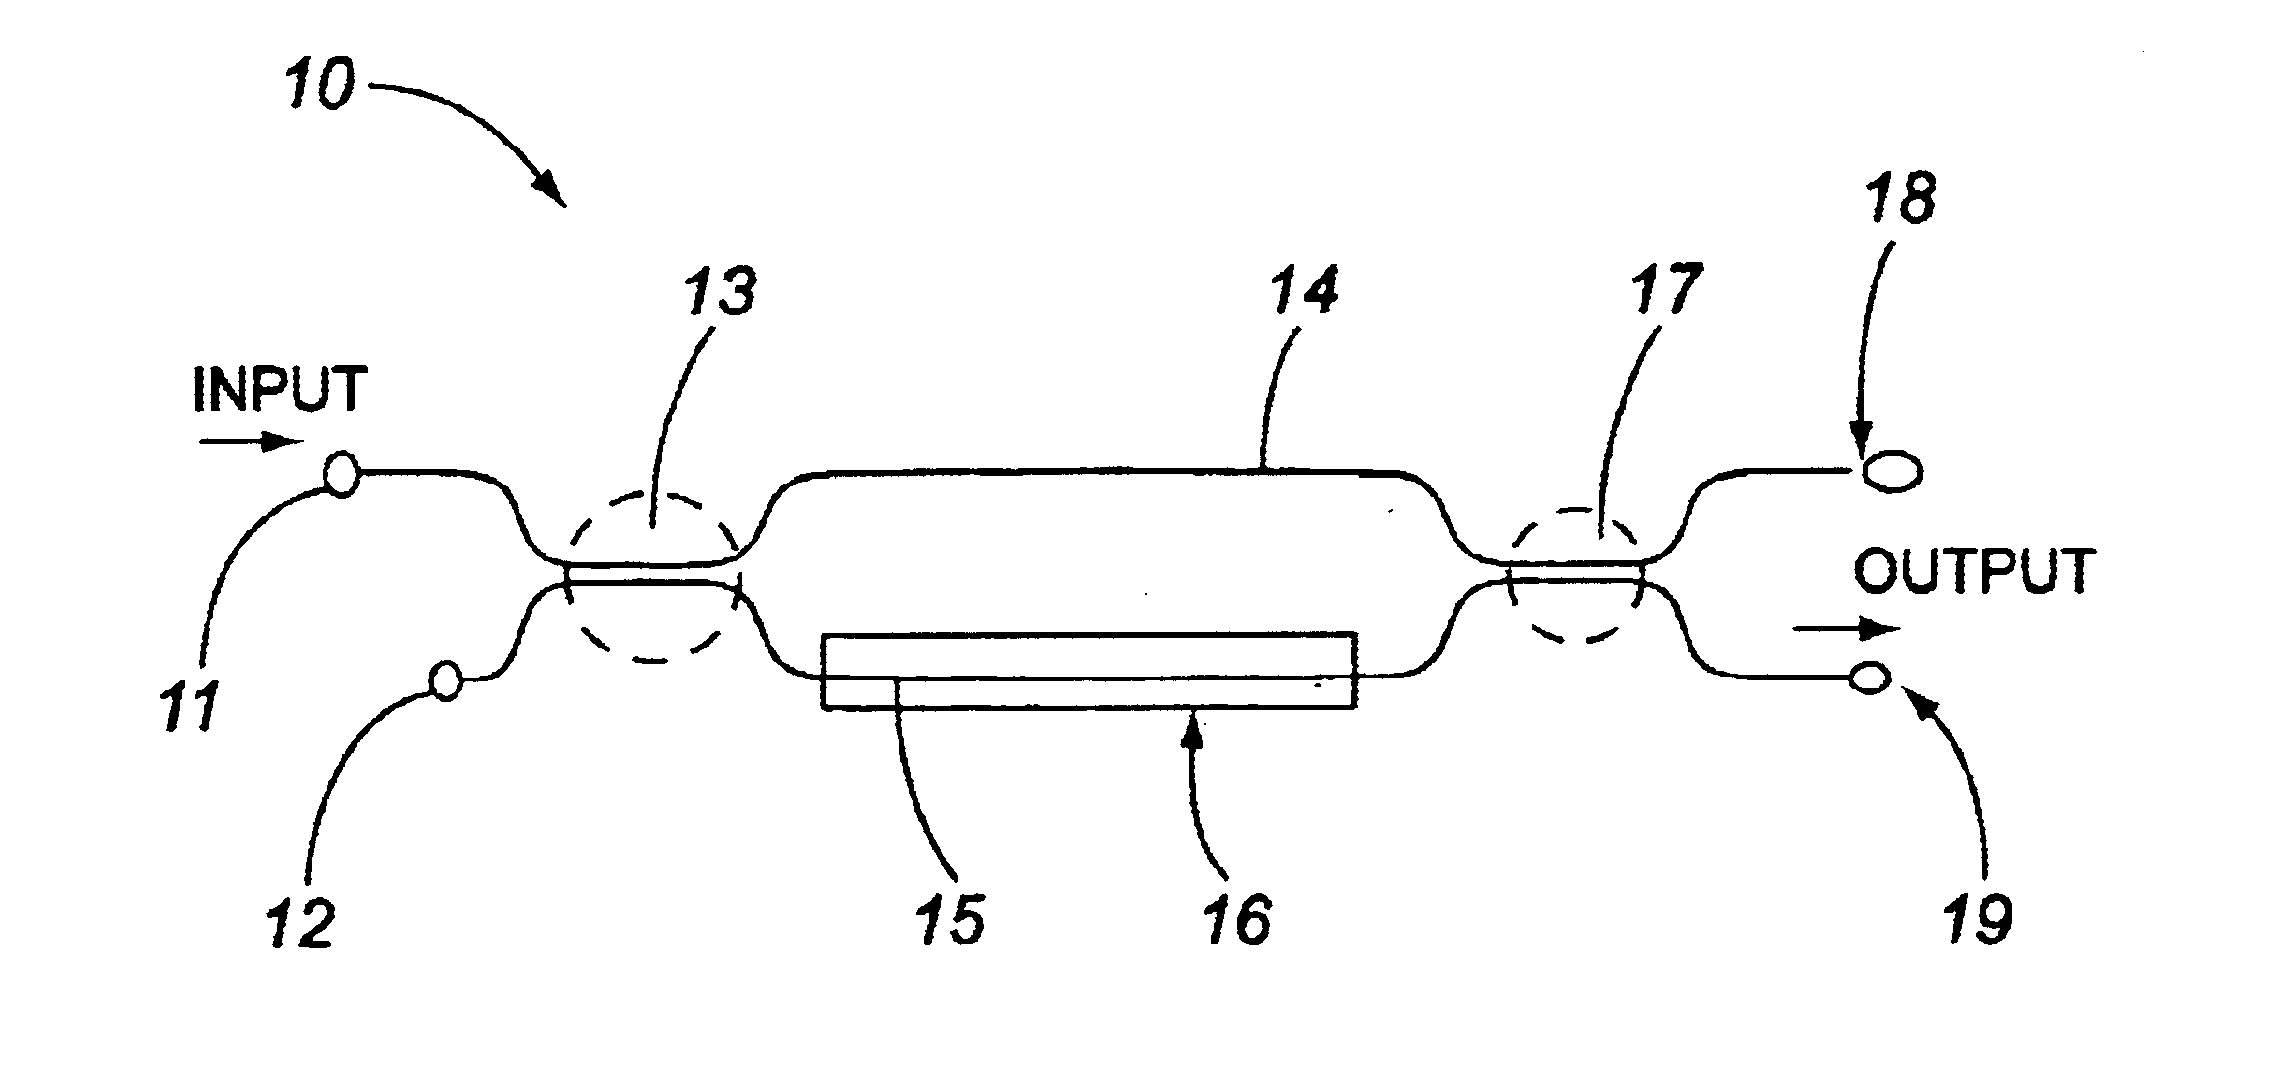 Birefringence compensated integrated optical switching or modulation device